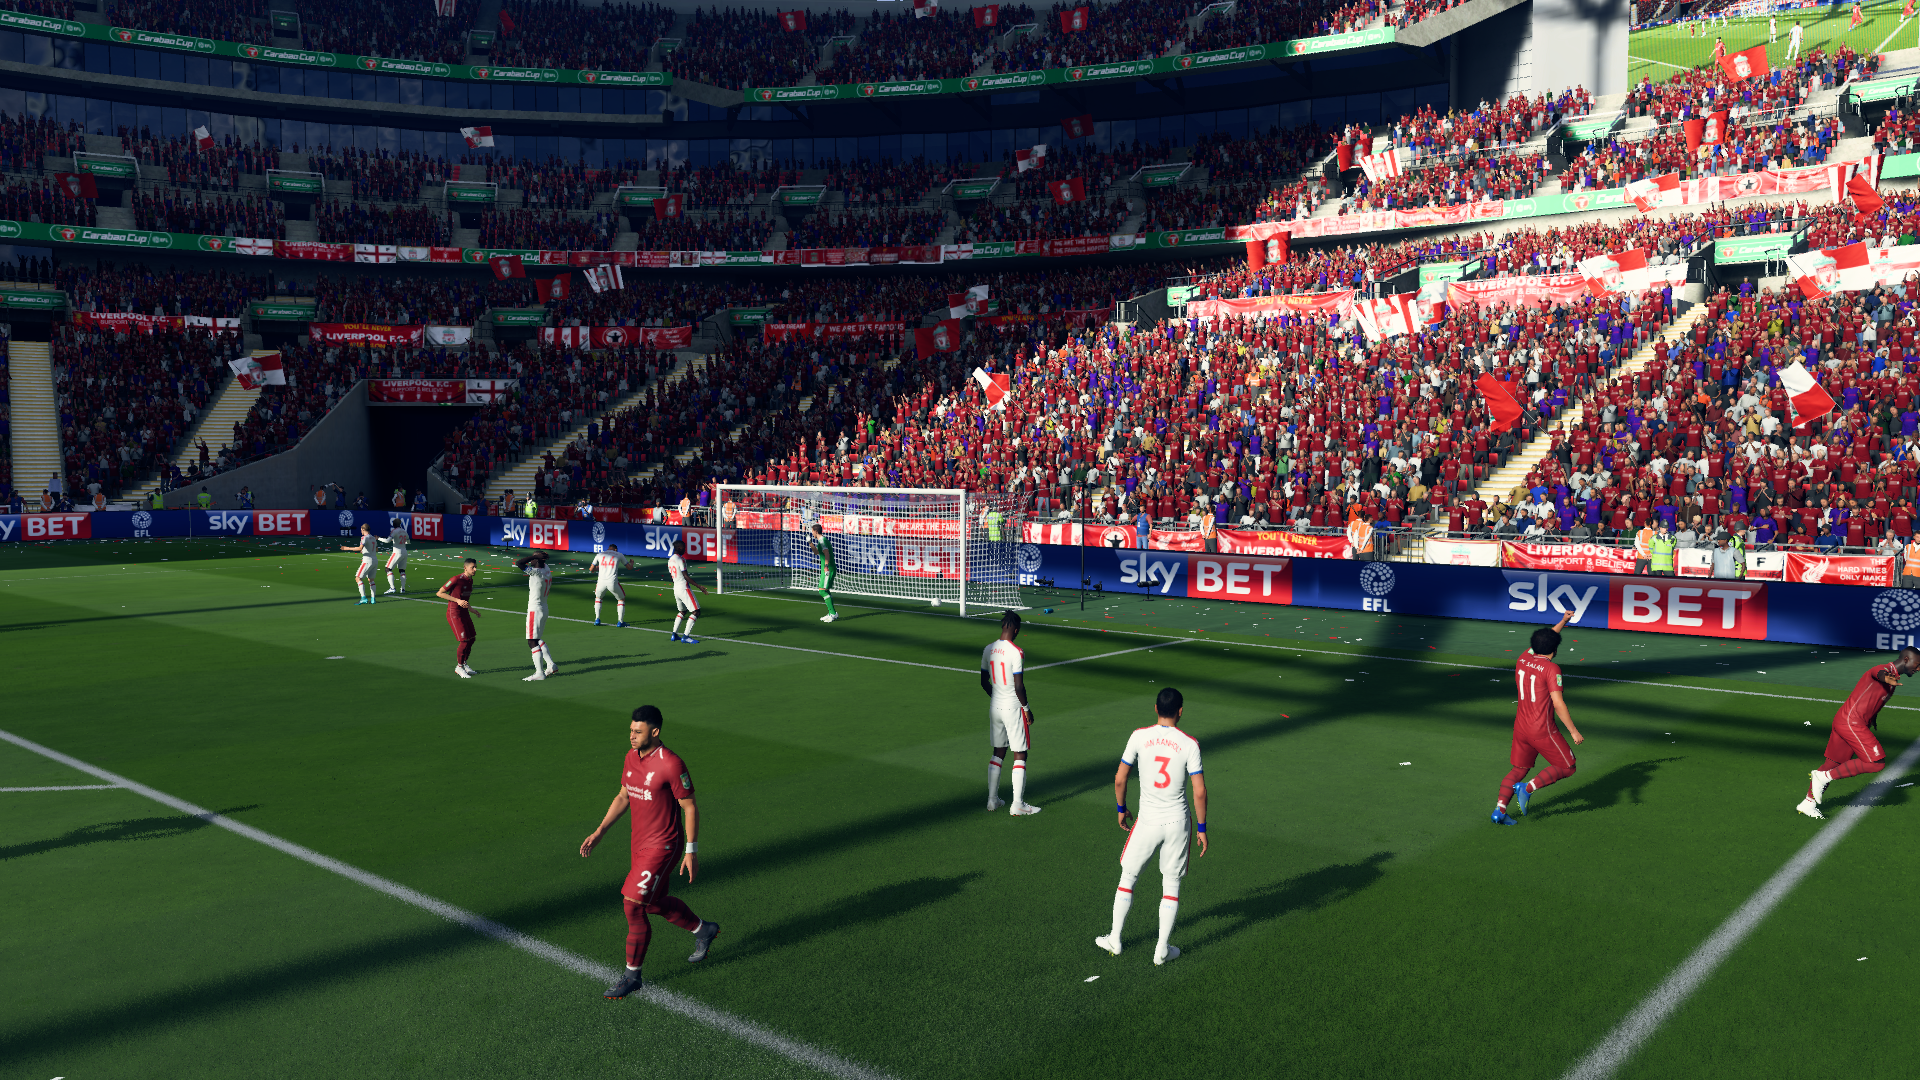 Andy's FIFA 19 Mod | Soccer Gaming1920 x 1080